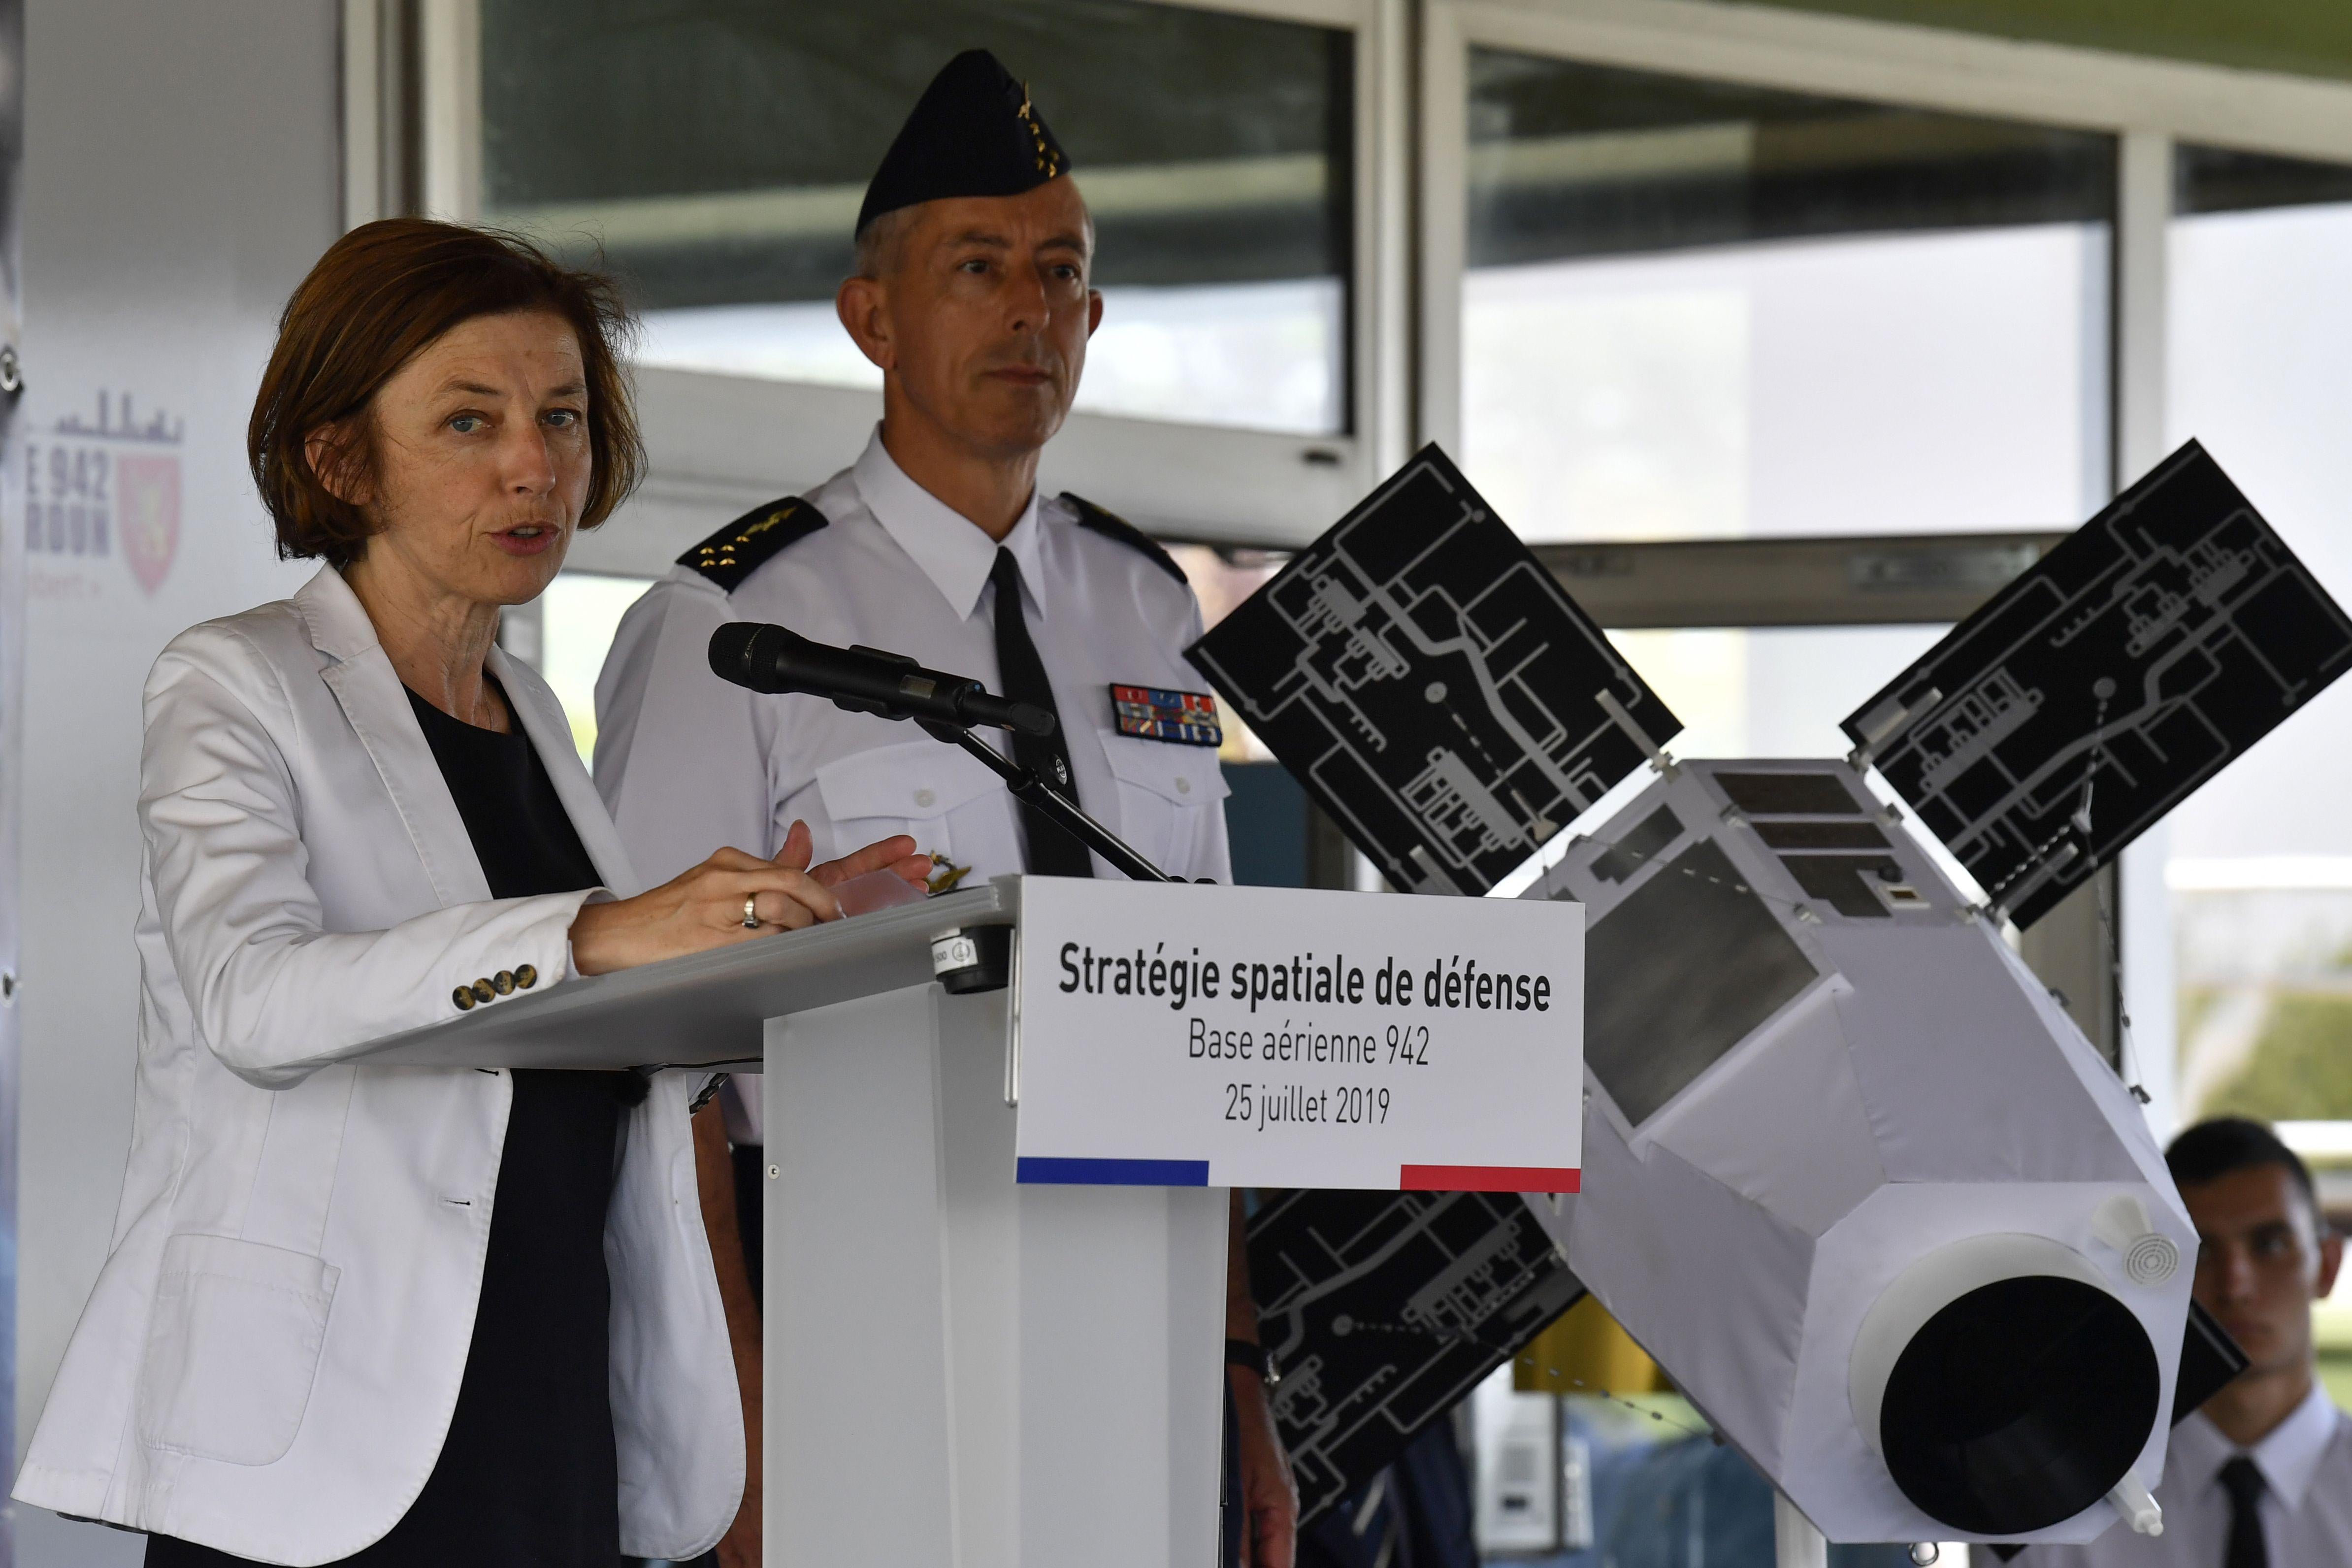 French Minister of Defence Florence Parly (L), addresses a speech next to the Air Force general Philippe Lavigne (C) to present the new Defence space Strategy on July 25, 2019 at the Command of Air Defence and Air Operations (Commandement de la defense aerienne et des operations aeriennes - CDAOA) in the base 942 on the Verdun mount in Poleymieux-au-Mont-d'Or near Lyon, eastern France. (Photo by PHILIPPE DESMAZES / AFP)        (Photo credit should read PHILIPPE DESMAZES/AFP/Getty Images)